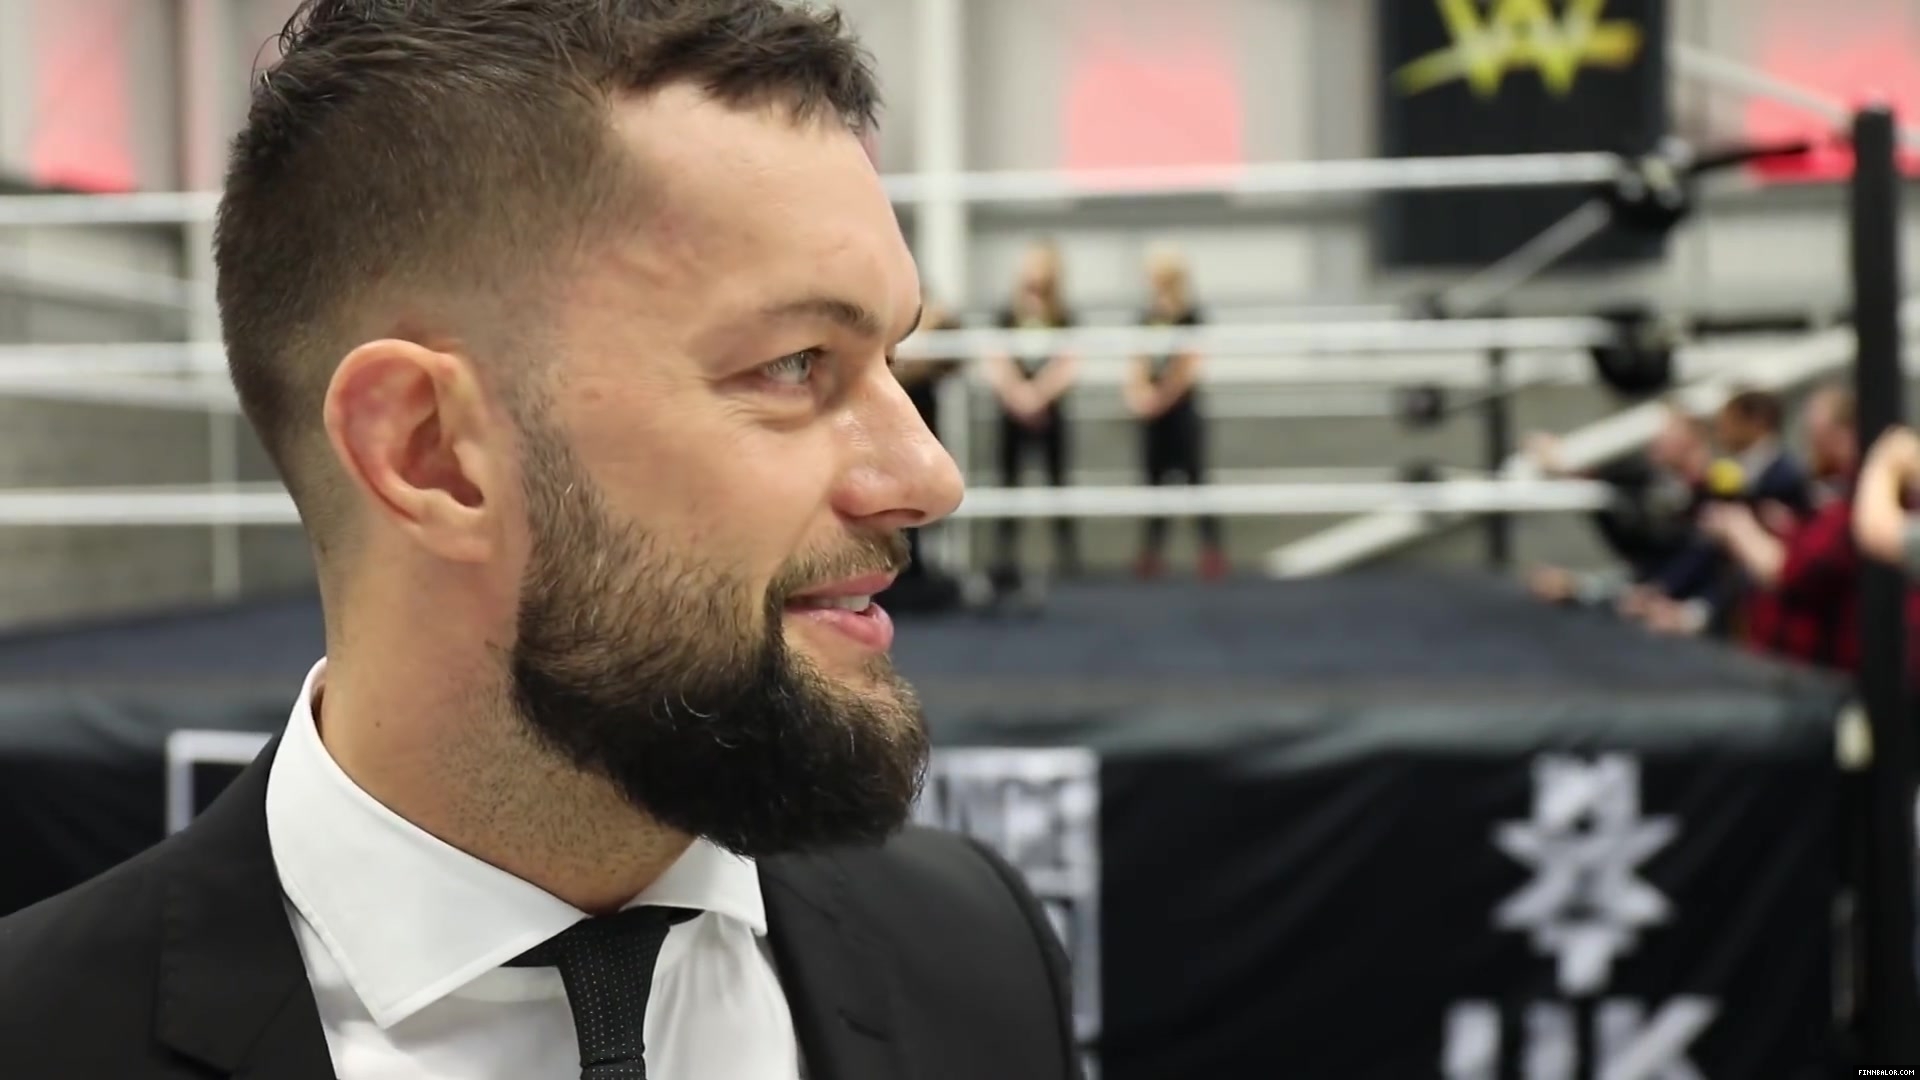 WWE_Superstar_FINN_BALOR_joins_MOUSTACHE_MOUNTAIN_at_the_opening_of_the_NXT_UK_PC_075.jpg